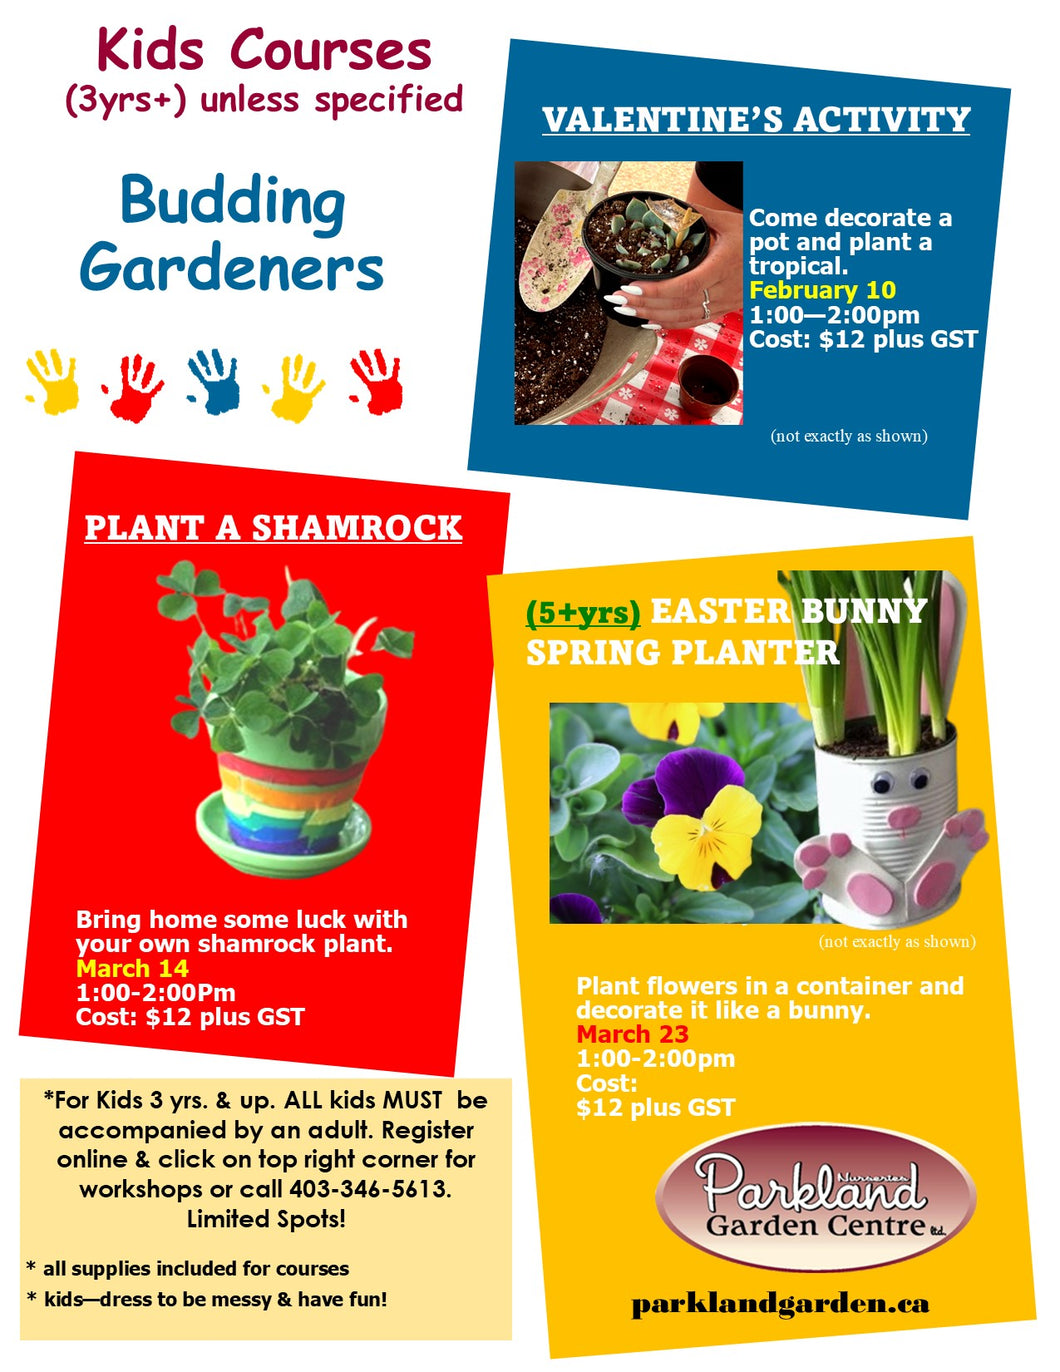 Kids Course Plant A Shamrock: March 14 from 1:00 to 2:00pm